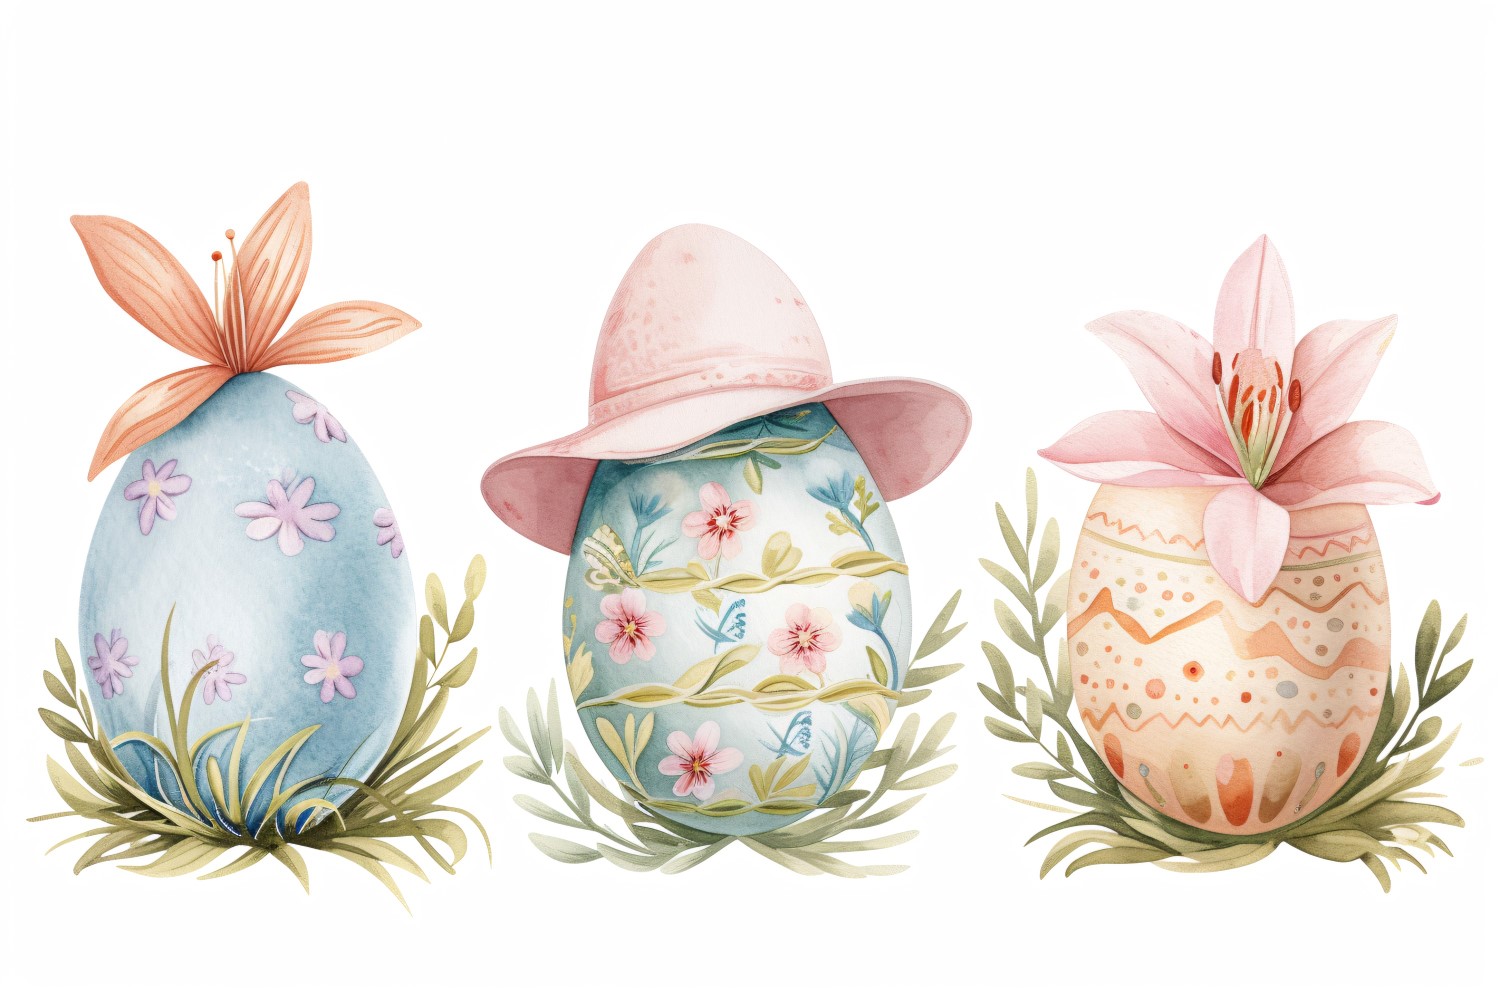 Decorative Eggs With A Hat On His Eyes Near Giant Easter Egg 131